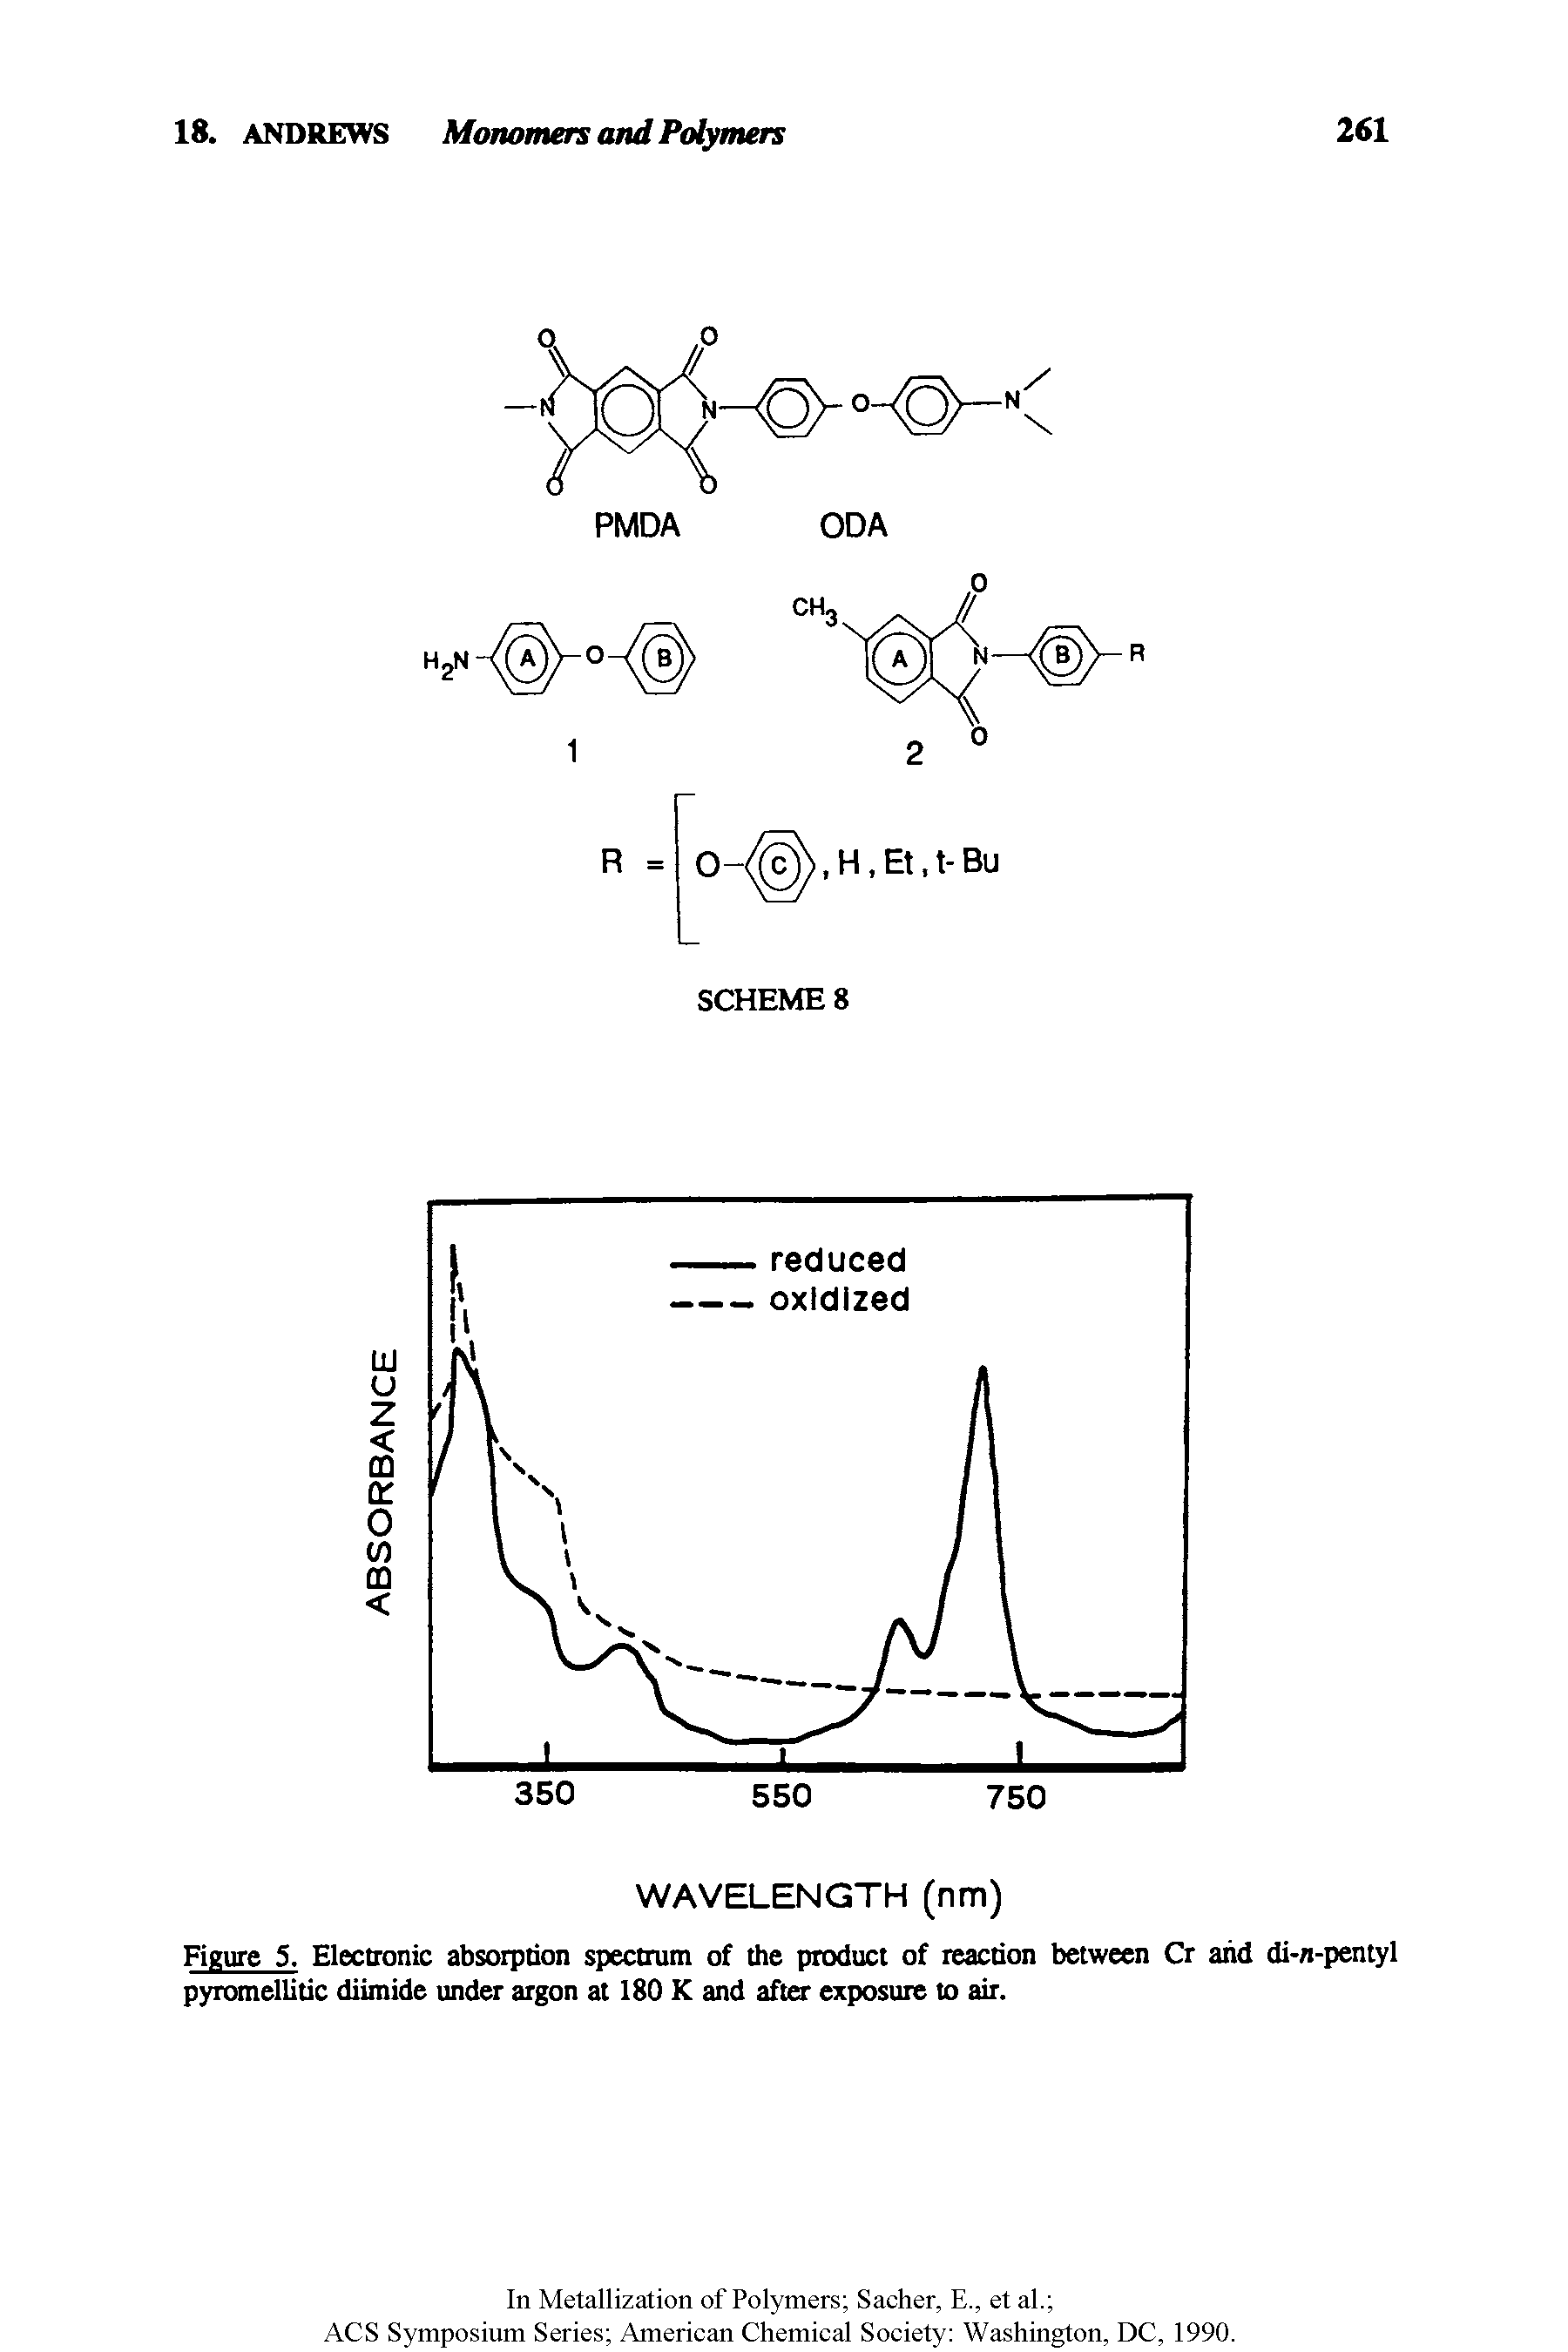 Figure 5. Electronic absorption spectrum of the product of reaction between Cr and di-n-pentyl pyromellitic diimide under argon at 180 K and after exposure to air.